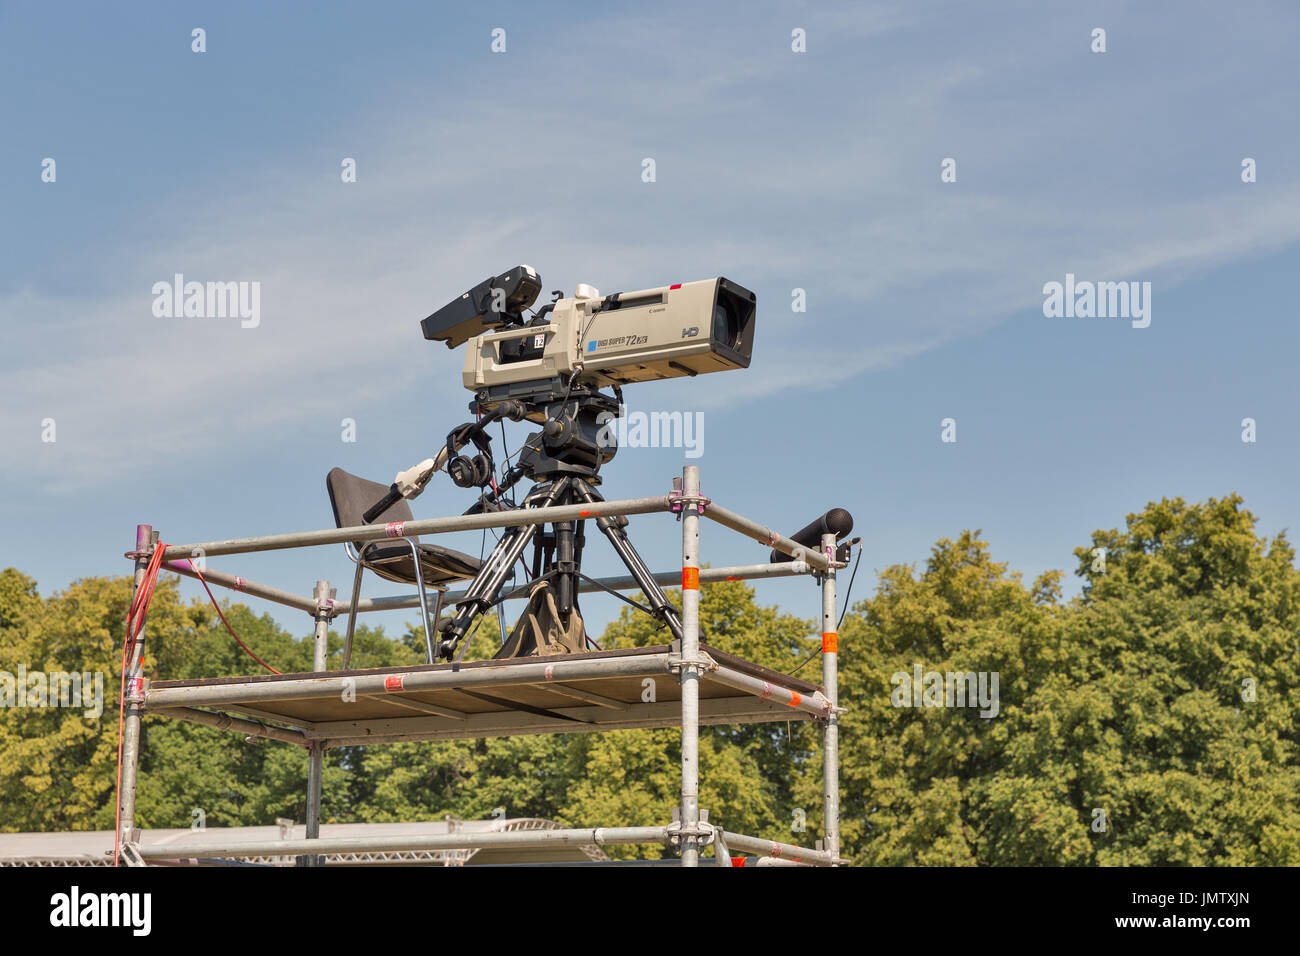 KIEV, UKRAINE - JUNE 28, 2017: Canon and Sony professional TV camera ready for video shooting outdoors at the Atlas Weekend music festival stage in Na Stock Photo